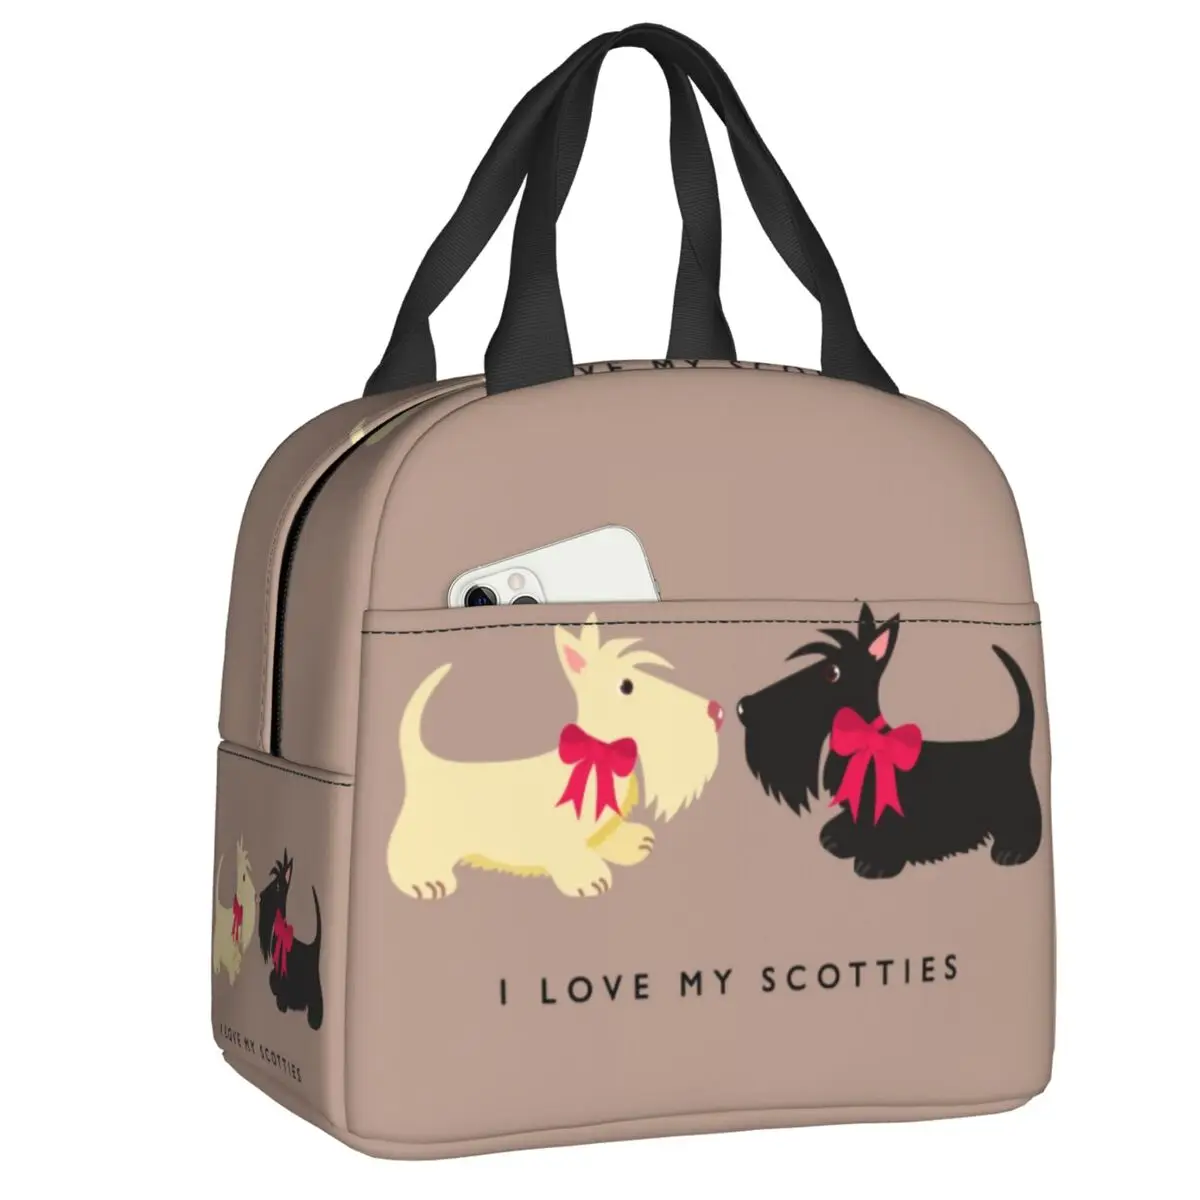 

I Love My Scotties Thermal Insulated Lunch Bags Scottish Terrier Dog Portable Lunch Container for Work Multifunction Food Box